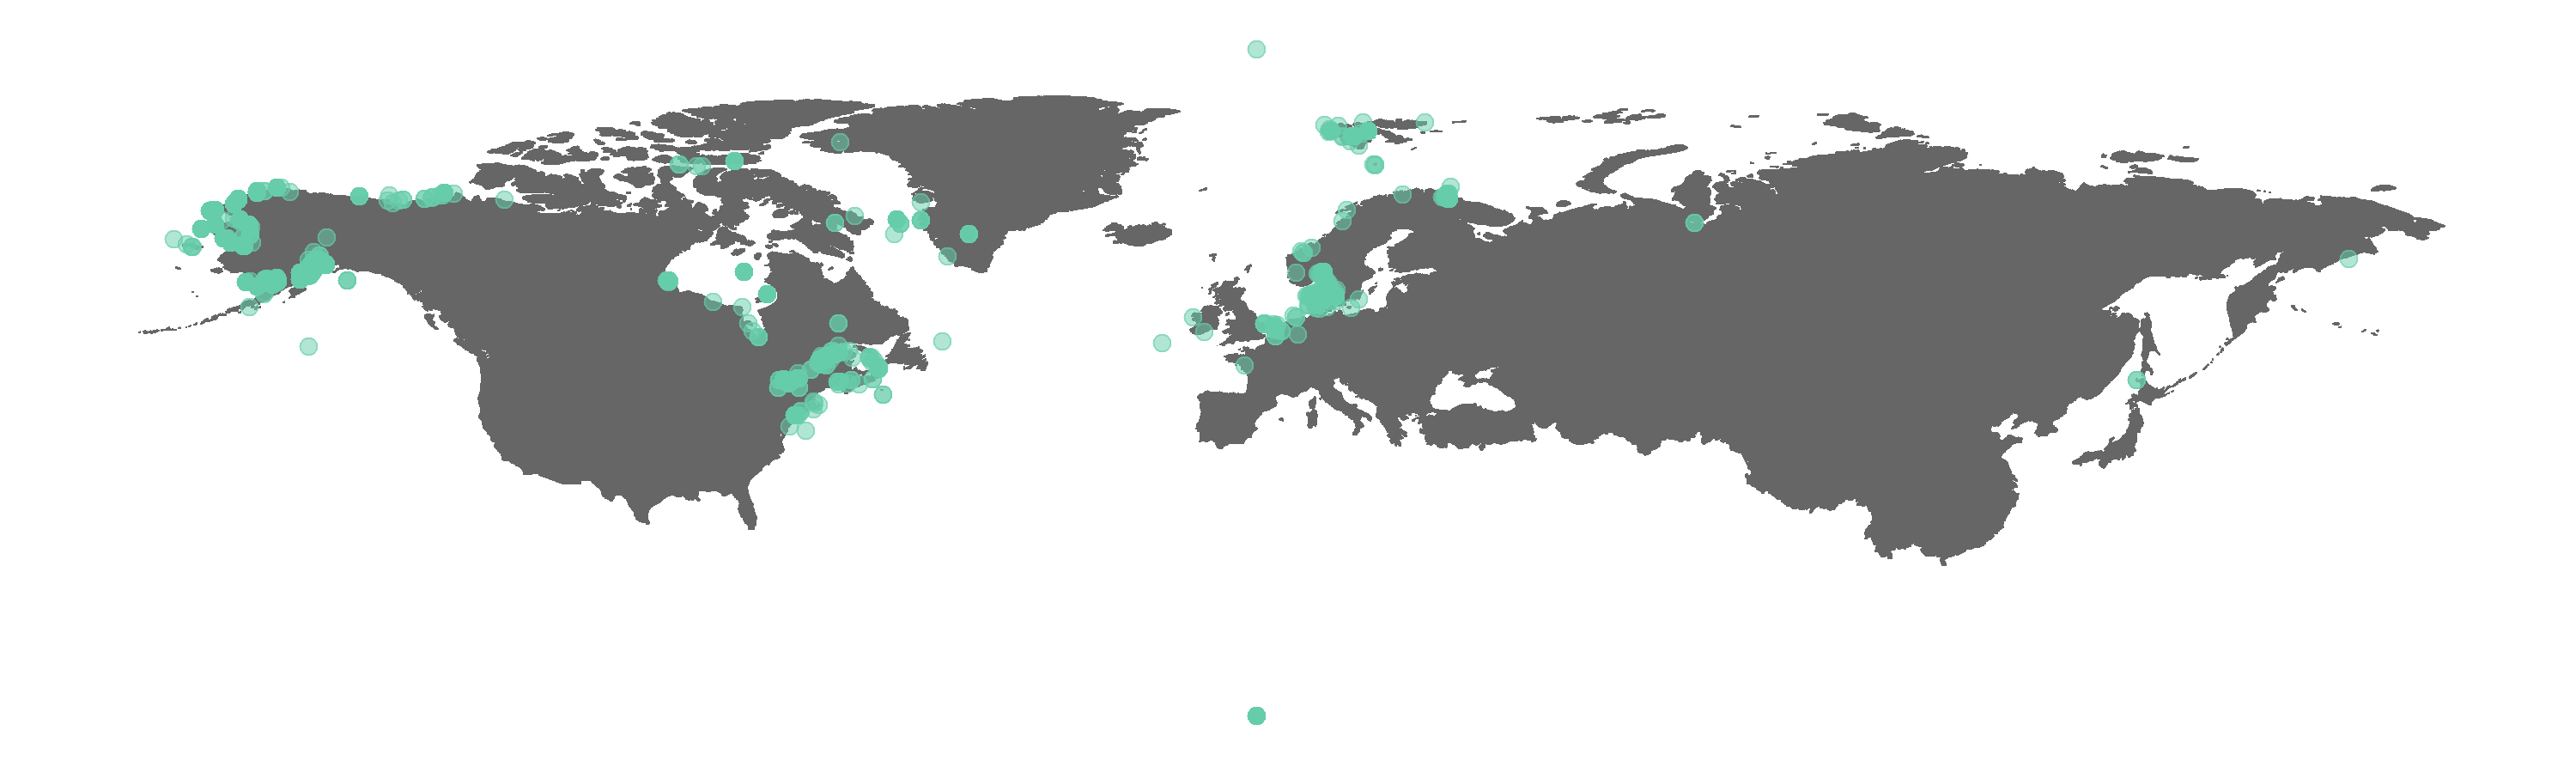 Figure 1. Map of all GBIF occurrences for the beluga whale.